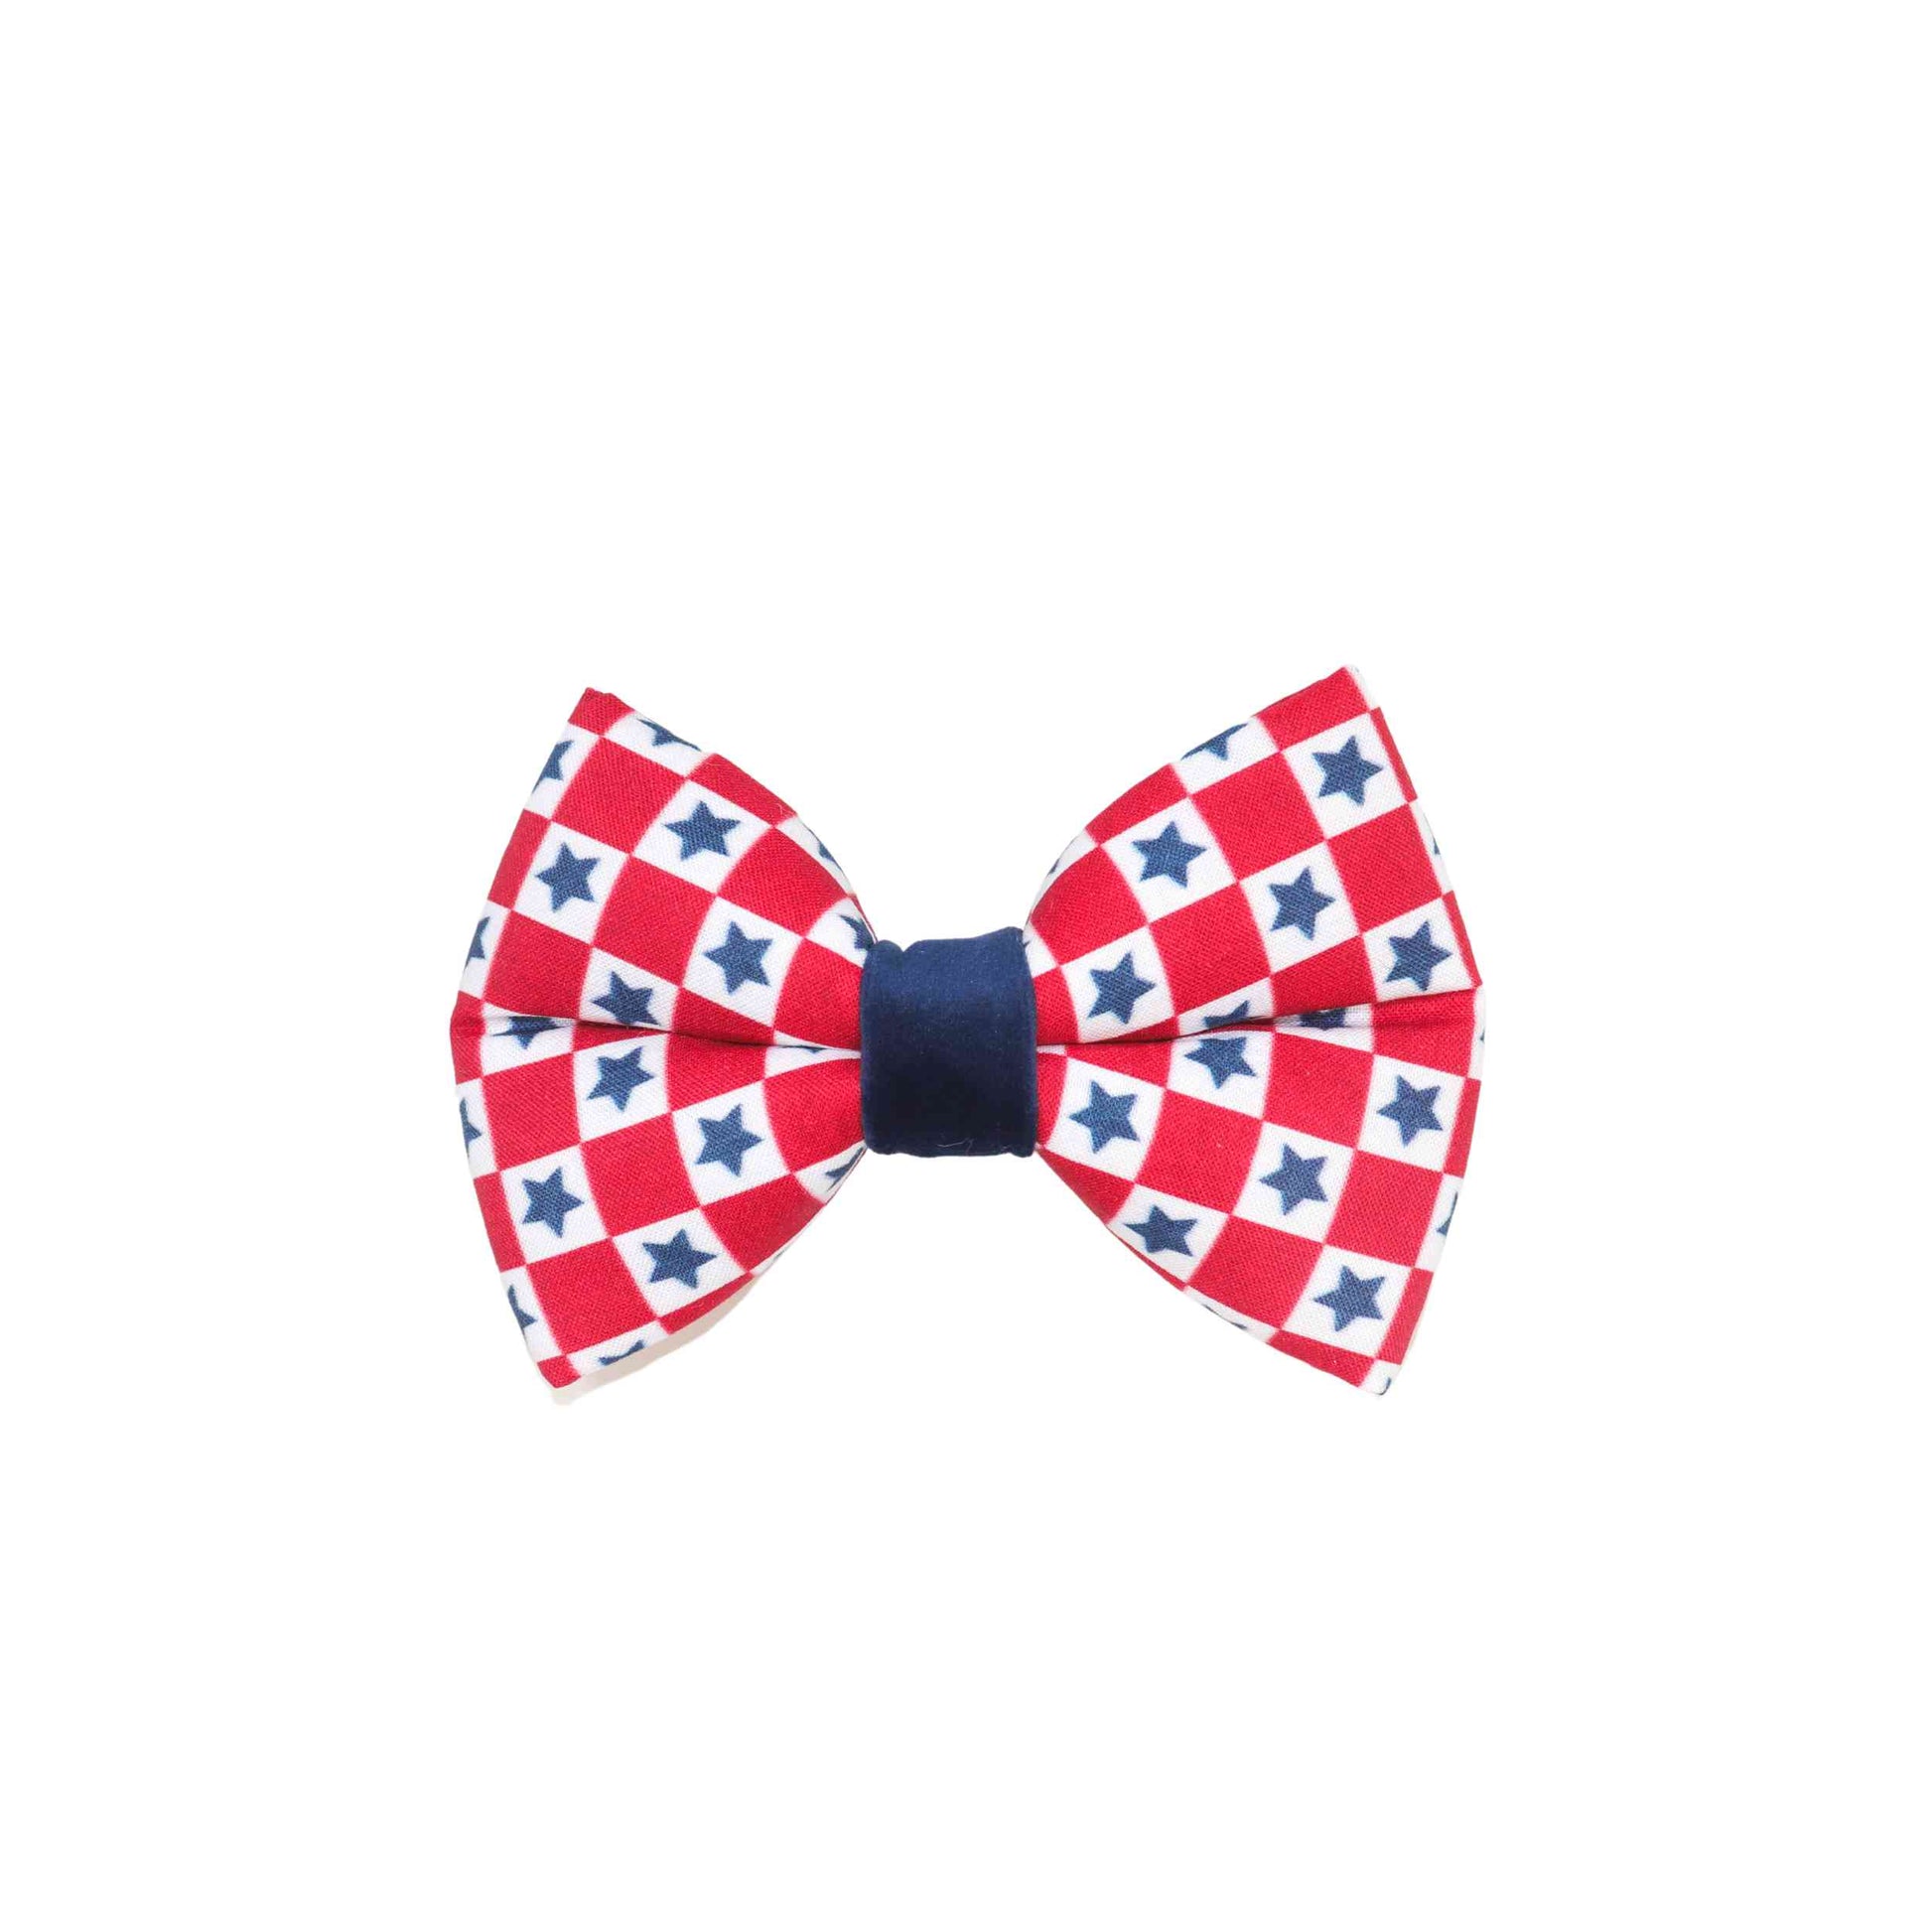 Show off your American pride with our 'American' red checker with blue stars dog bow tie, perfect for the 4th of July celebration. Our bow tie features a classic red checker design with blue stars, adding a touch of patriotism to your pet's wardrobe. The two elastic loops allow for a comfortable and secure fit over your pet's collar. Available for both girl and boy dogs, our bow tie is versatile and stylish for any occasion. 